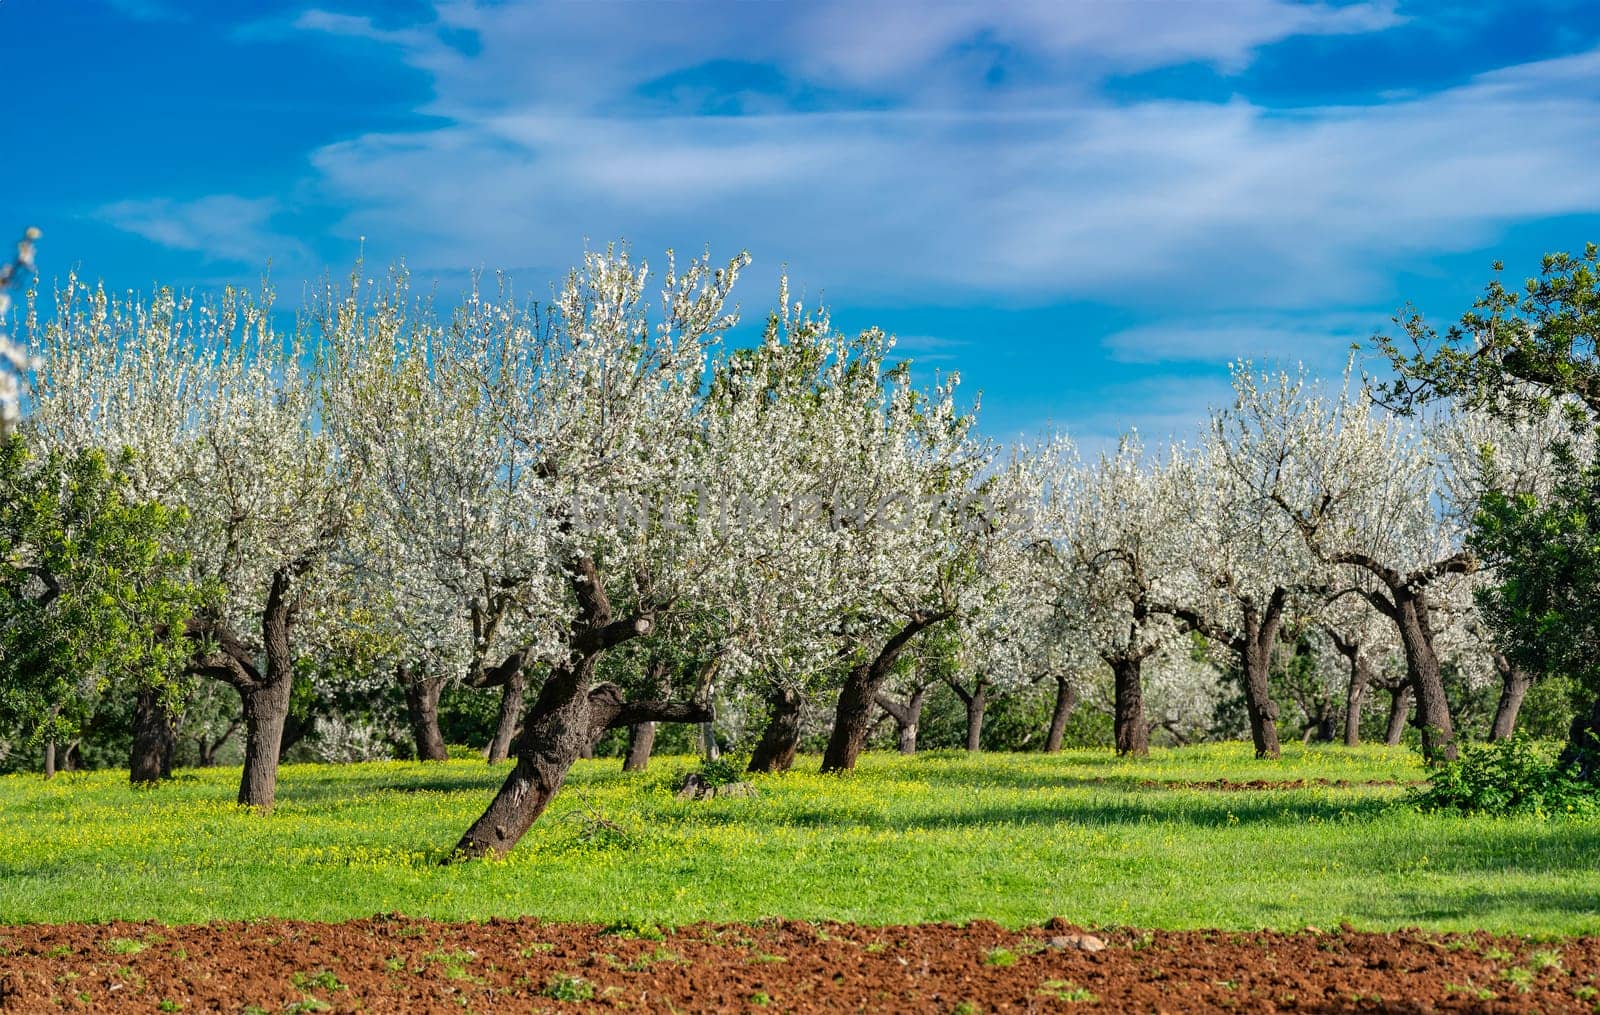 Spring's Symphony in the Orchard by Juanjo39